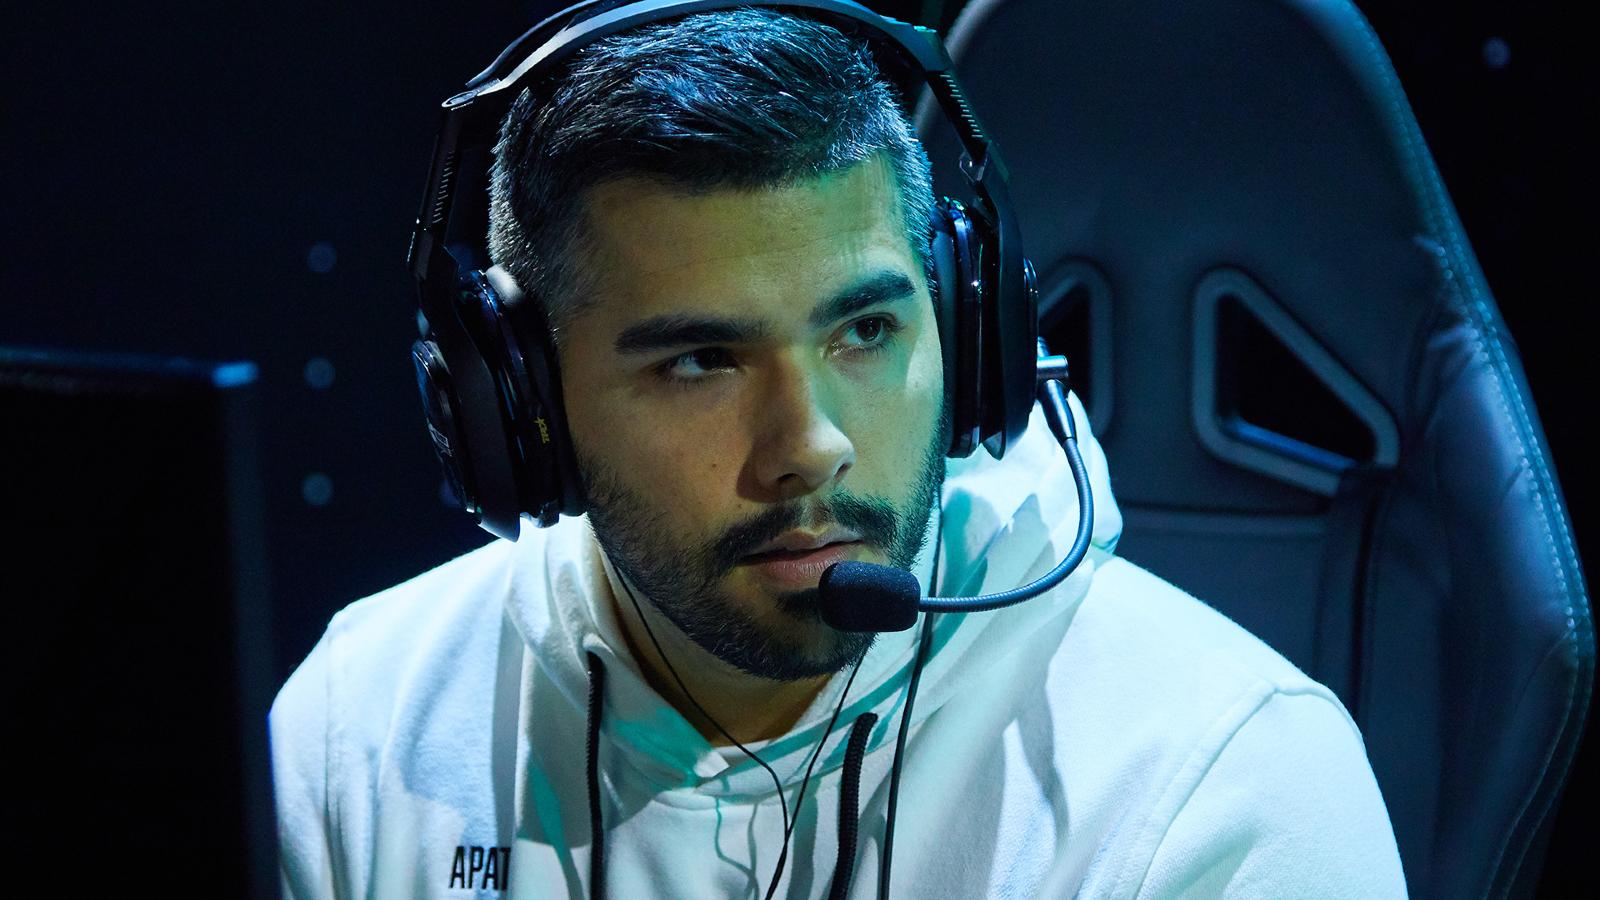 Apathy was a pro player for Los Angeles Guerrillas before turning to Warzone and Warzone 2.